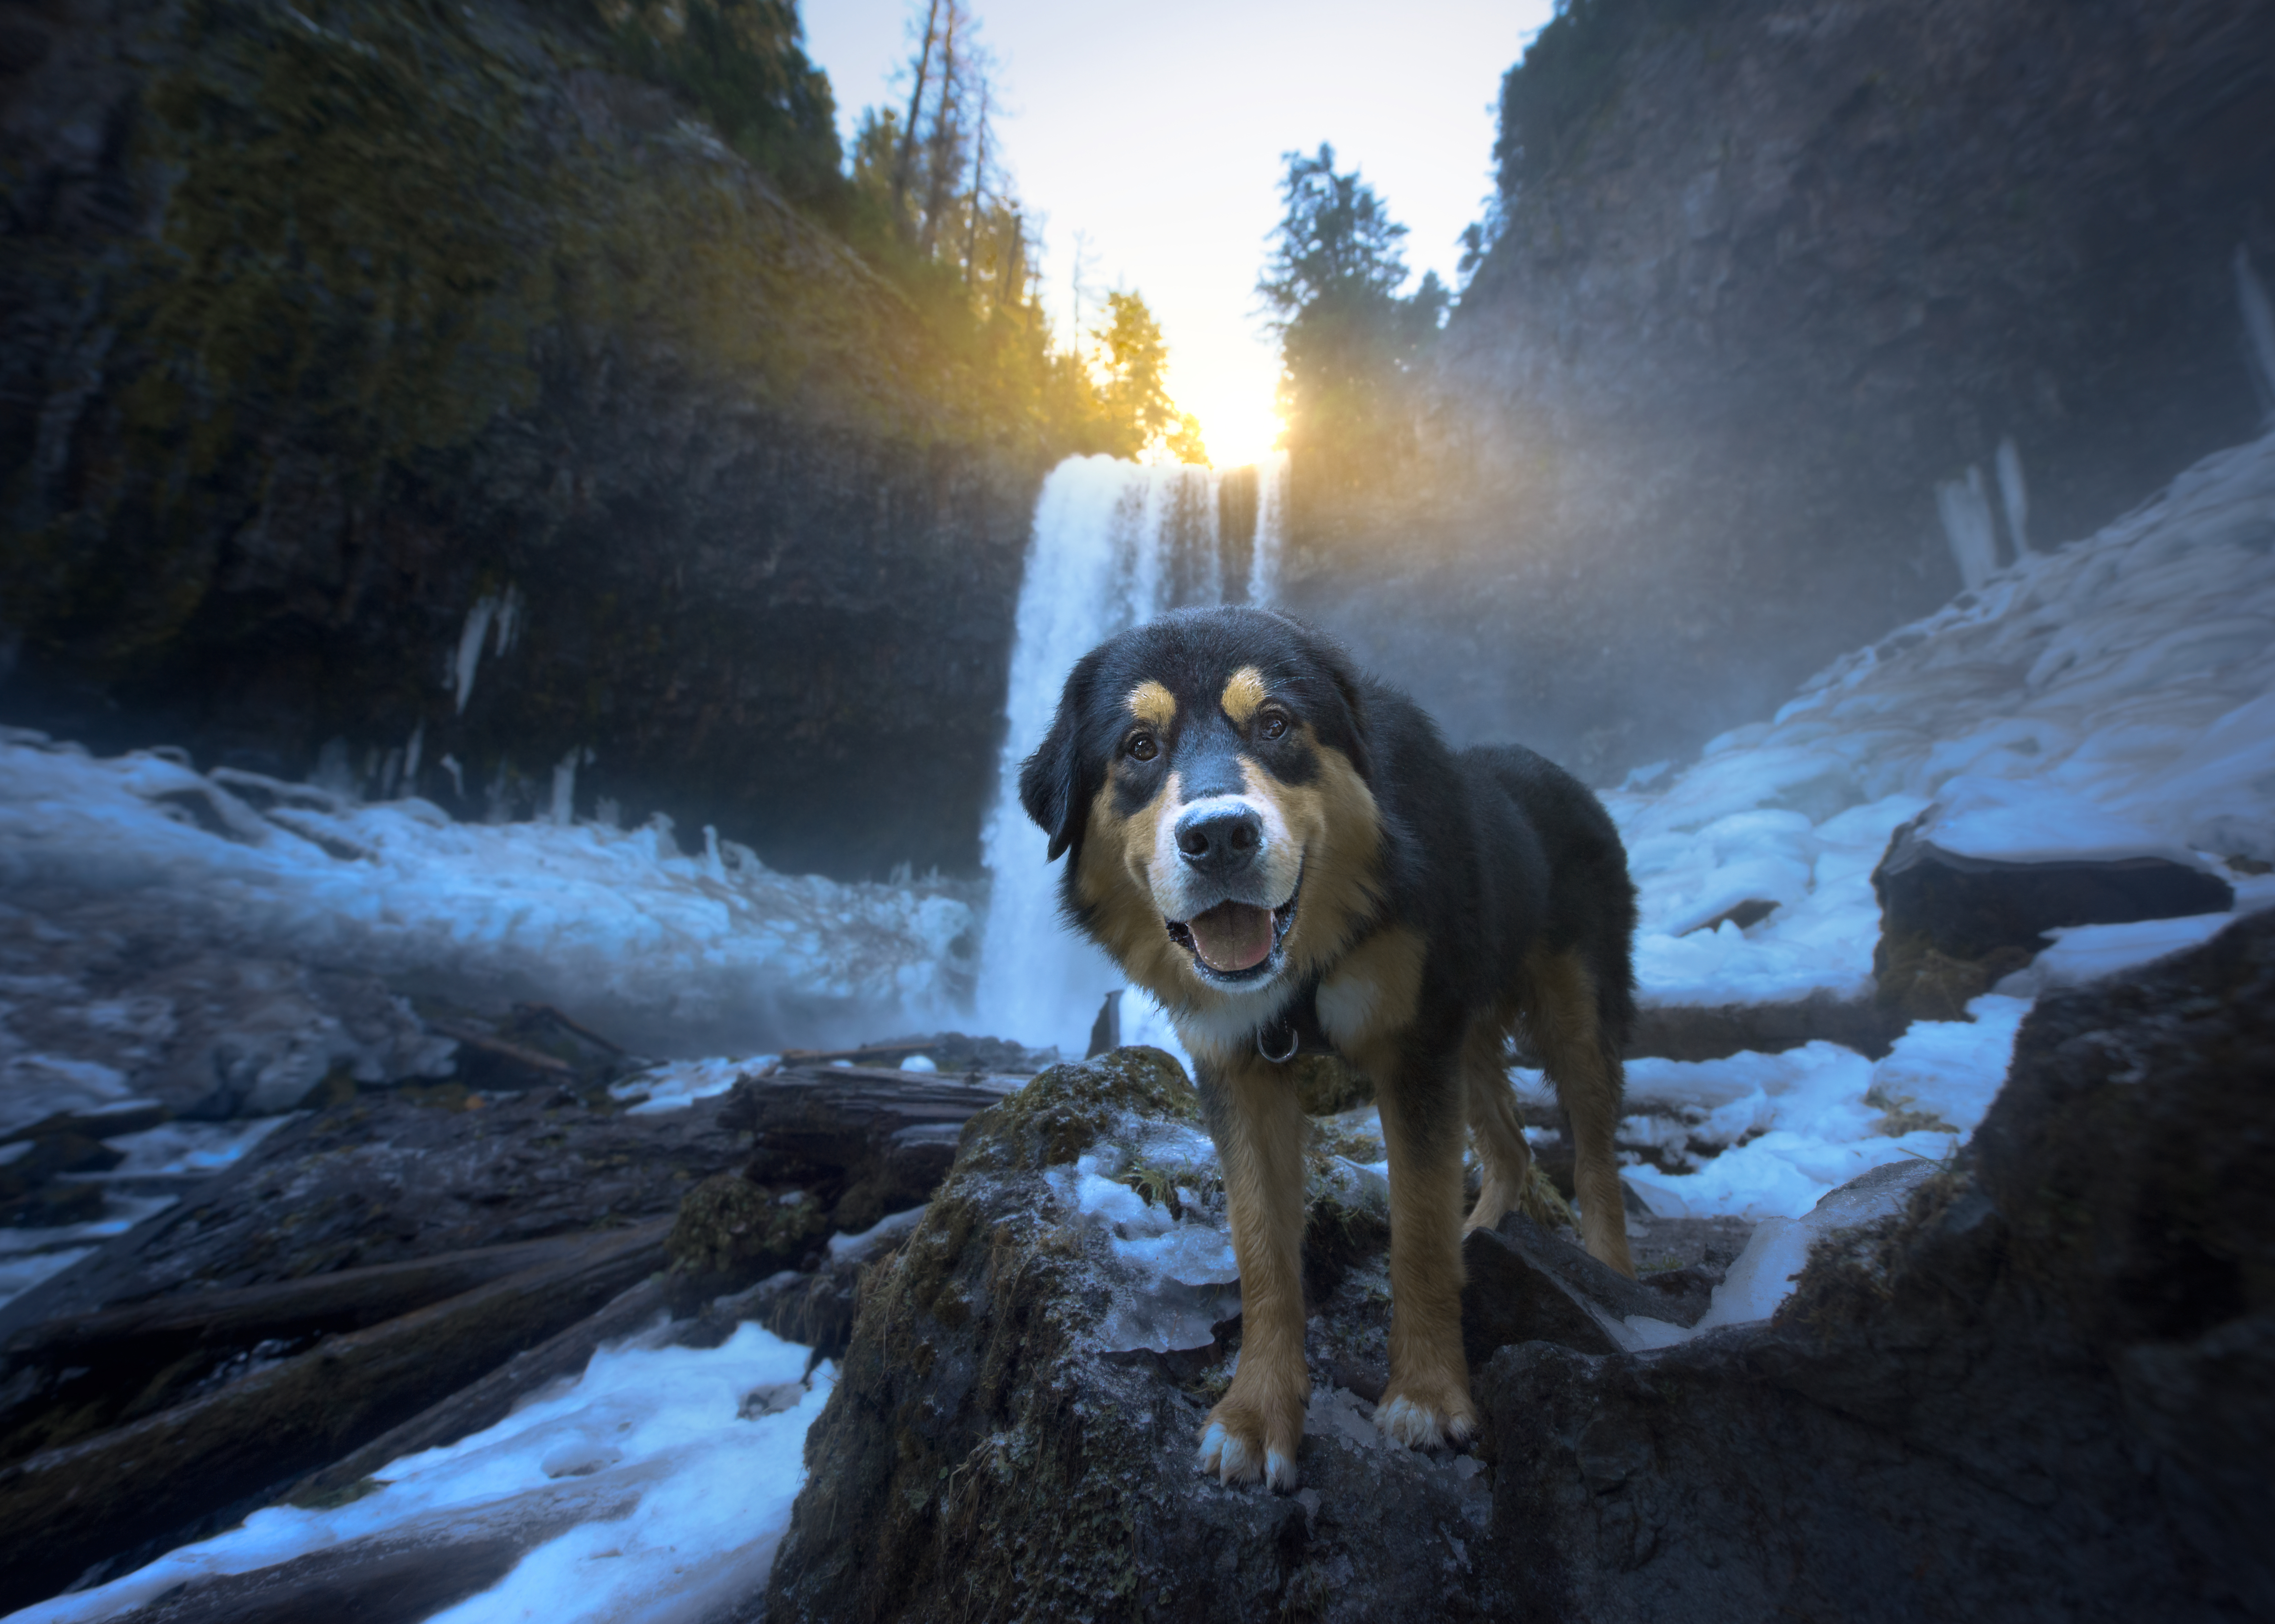 I Took A Picture Of My Best Bud And Favorite Waterfall